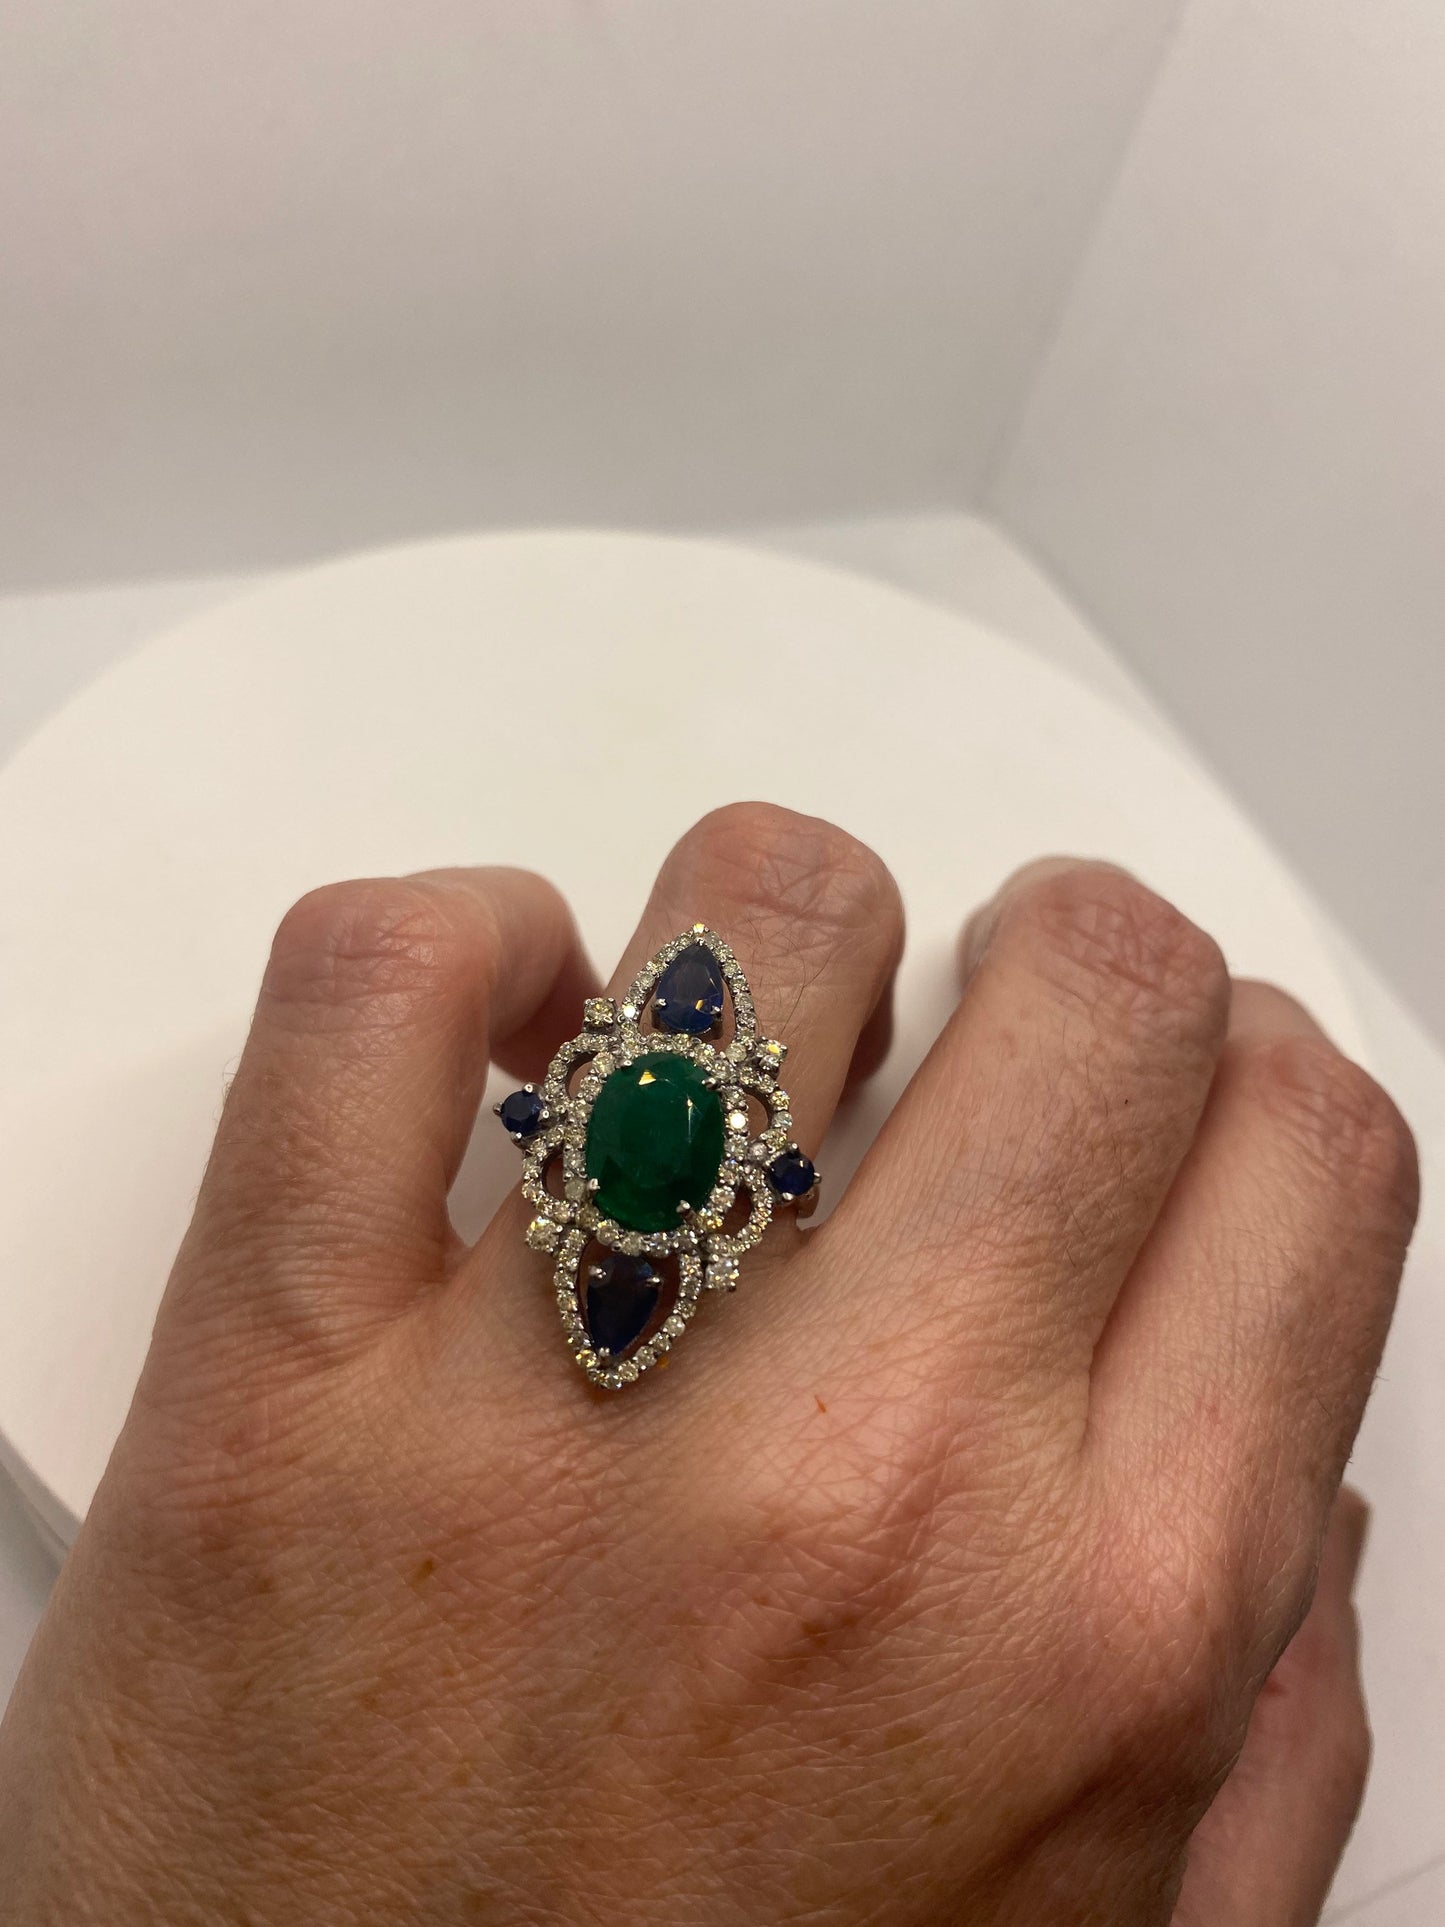 Vintage Emerald Sapphire Diamond Cocktail Ring 925 Sterling Silver Size 7